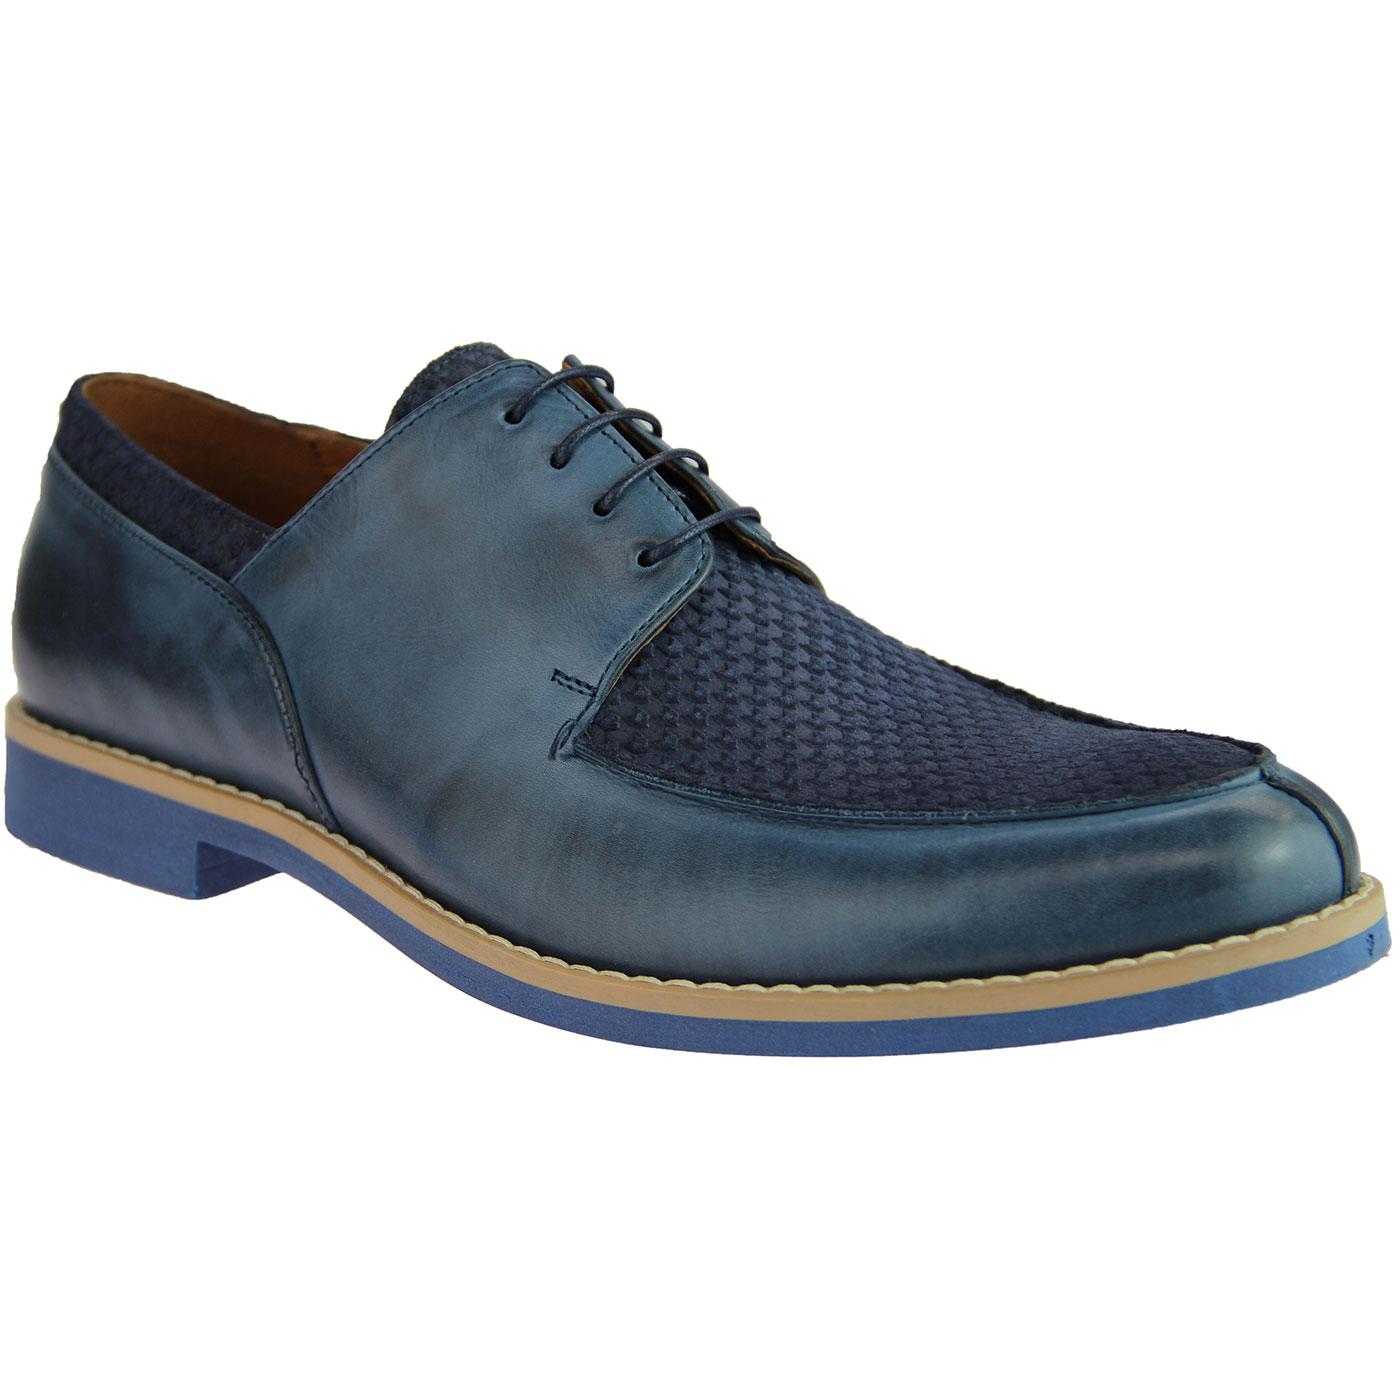 LACUZZO Retro Mod Dogtooth Stamp Suede Shoes 